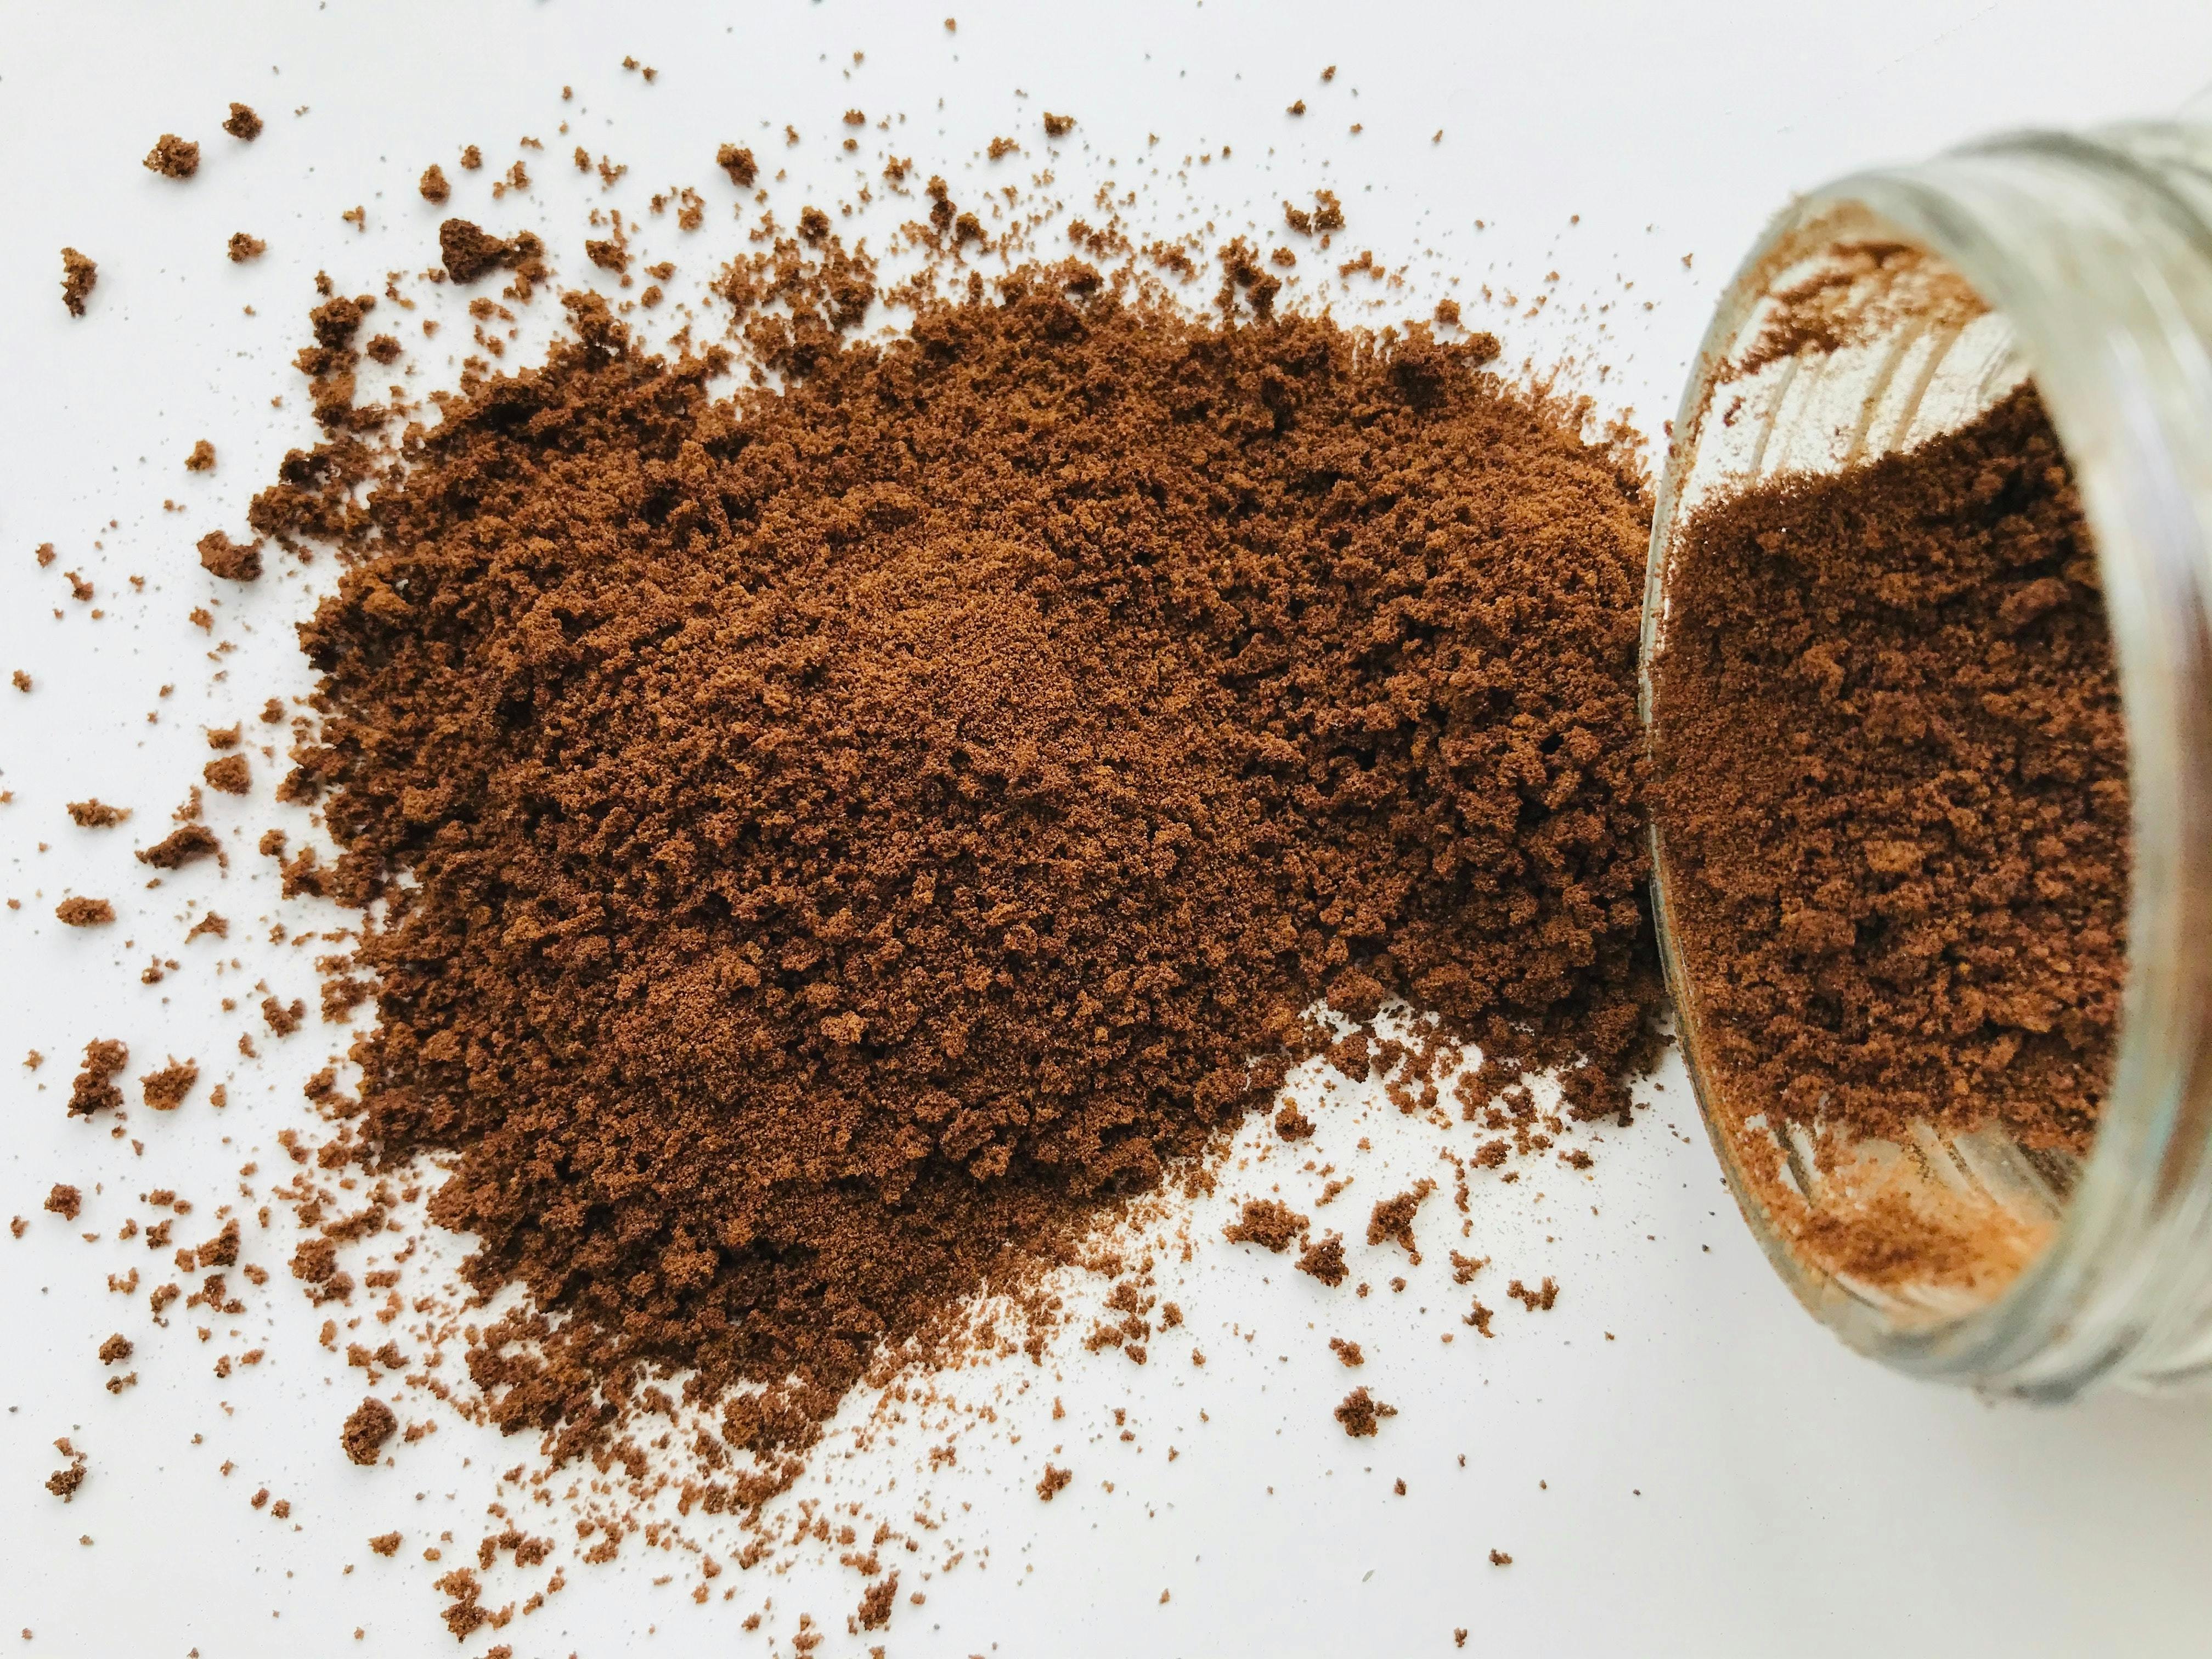 An open container spills some coffee grounds out on to a table.